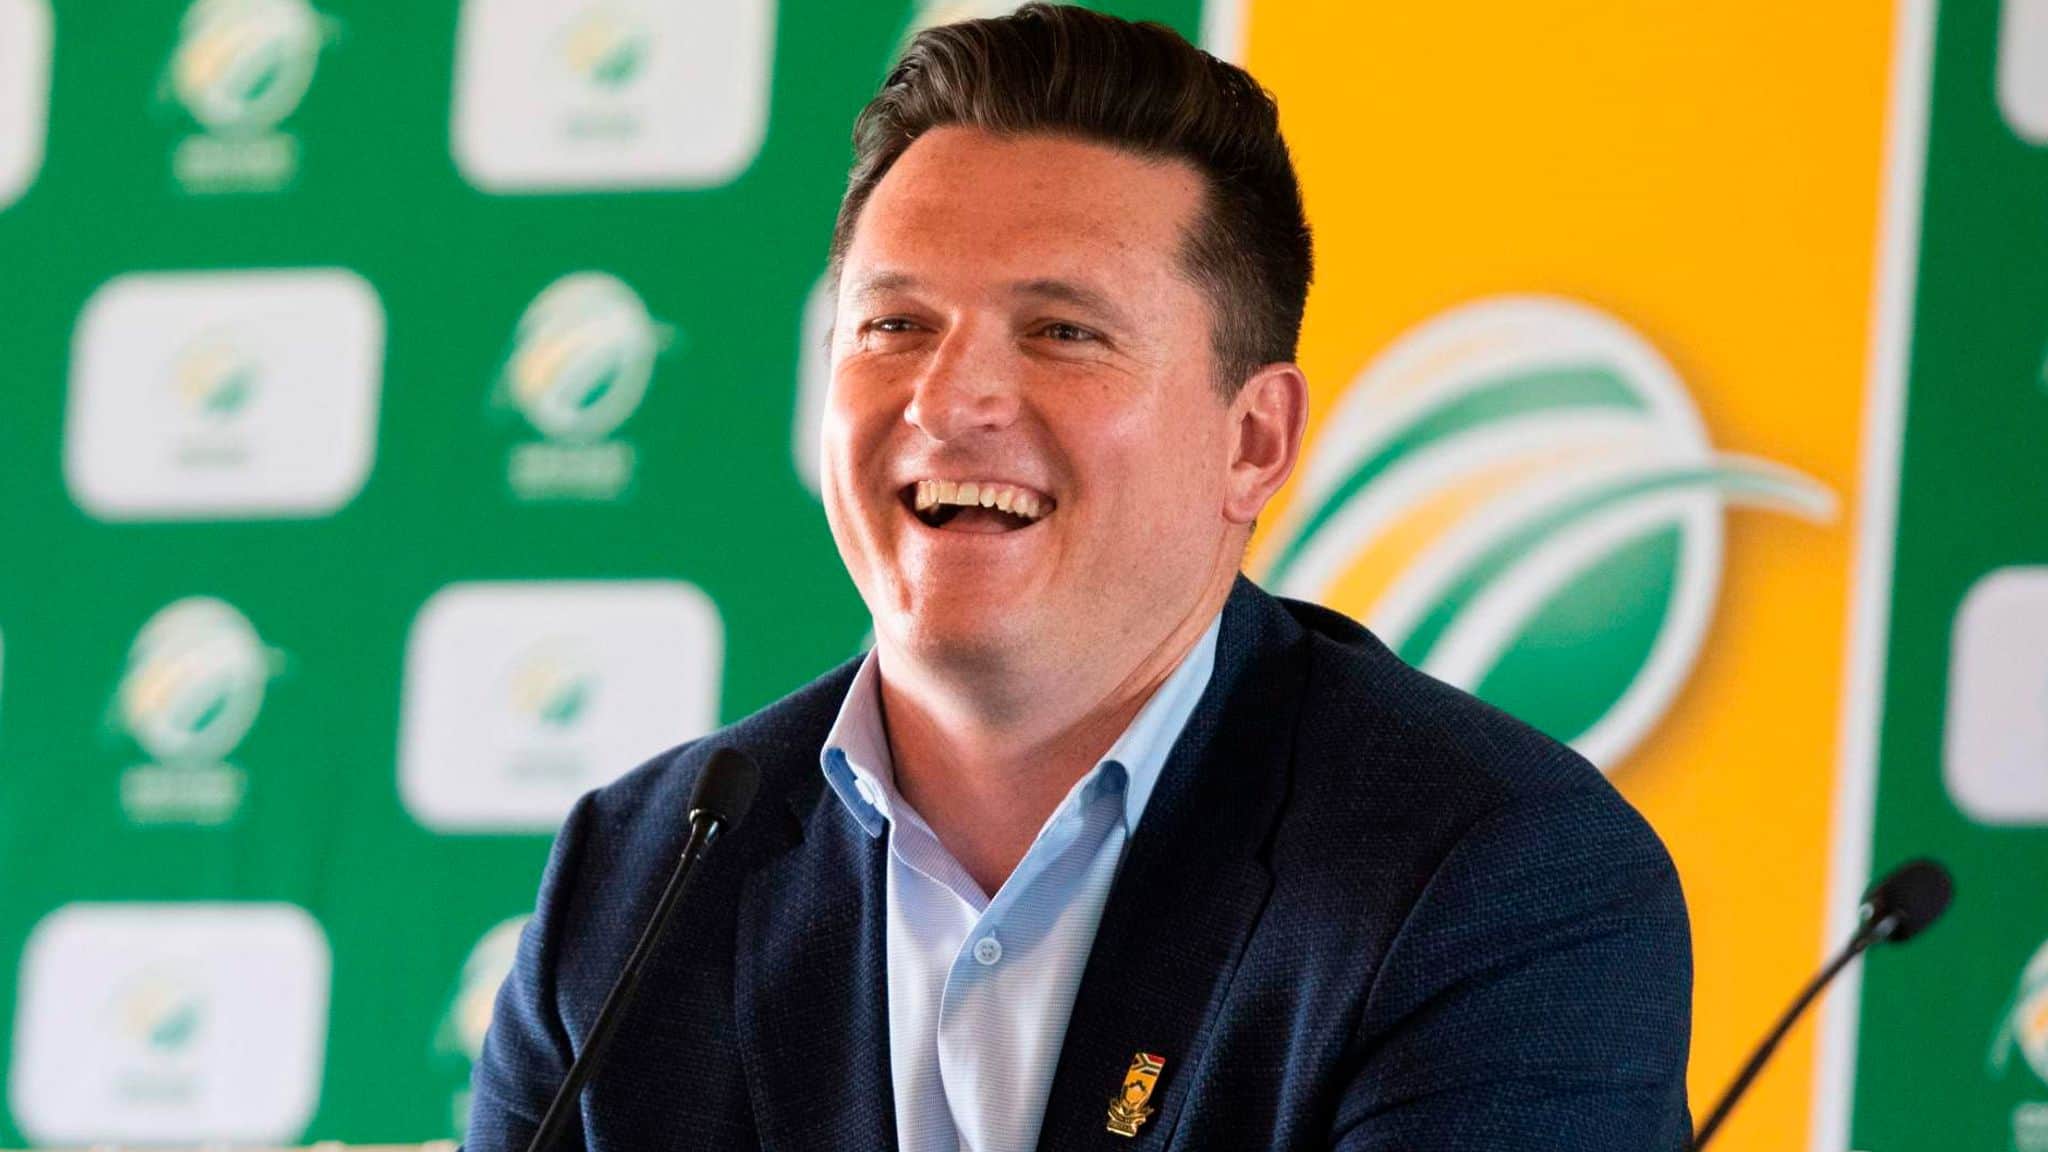 Graeme Smith feels bilateral ODI series need more context to lure fans